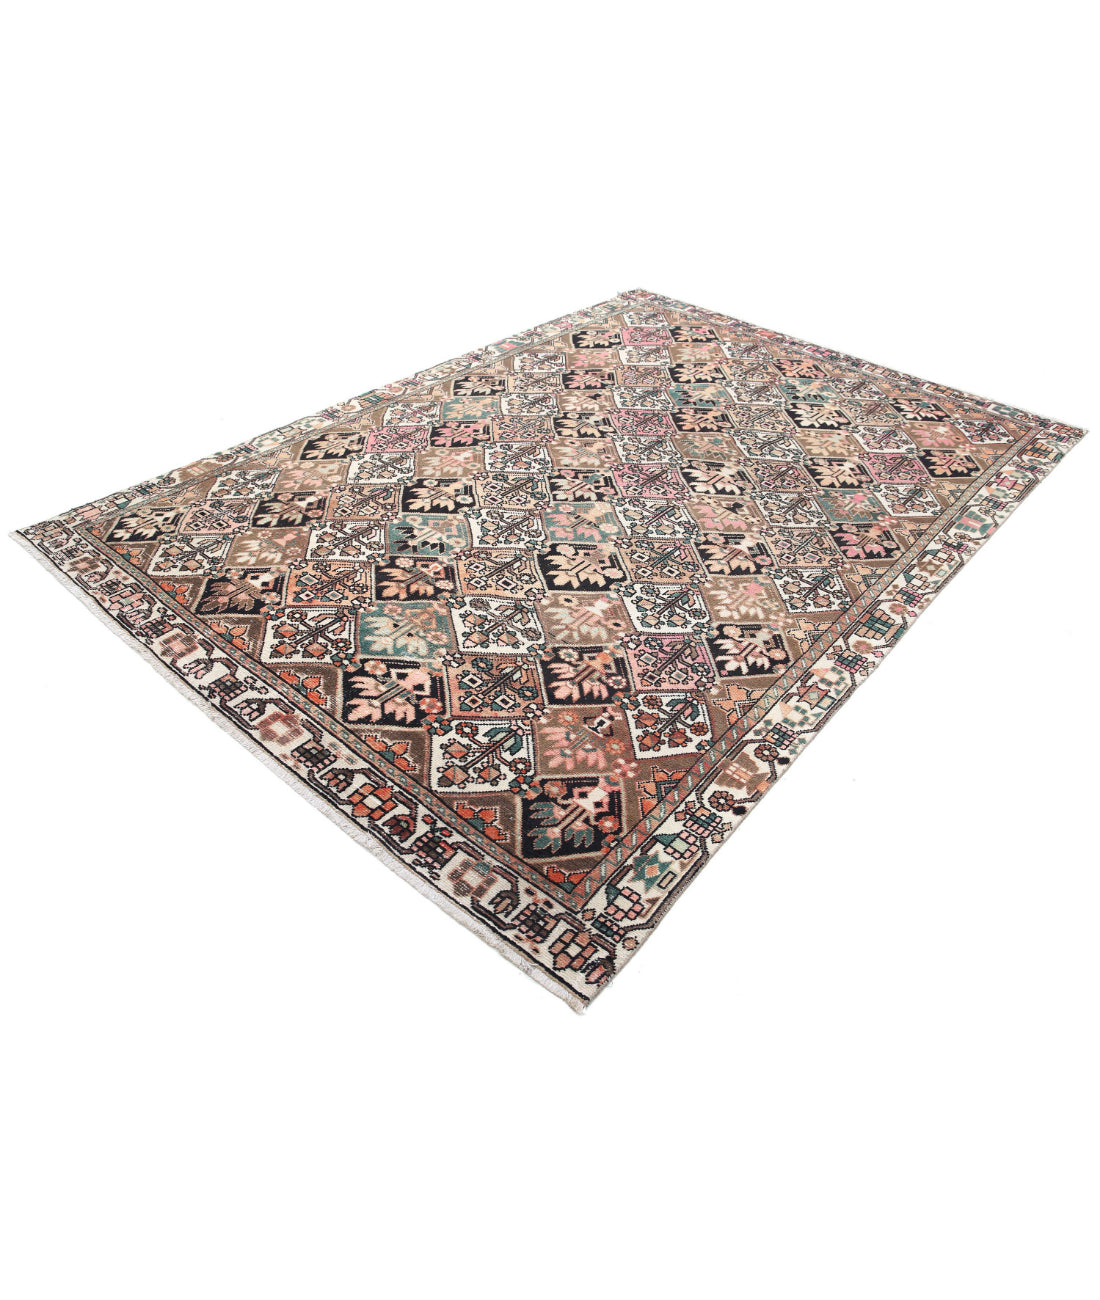 Hand Knotted Vintage Persian Bakhtiari Wool Rug - 6'7'' x 9'6'' 6'7'' x 9'6'' (198 X 285) / Brown / Ivory